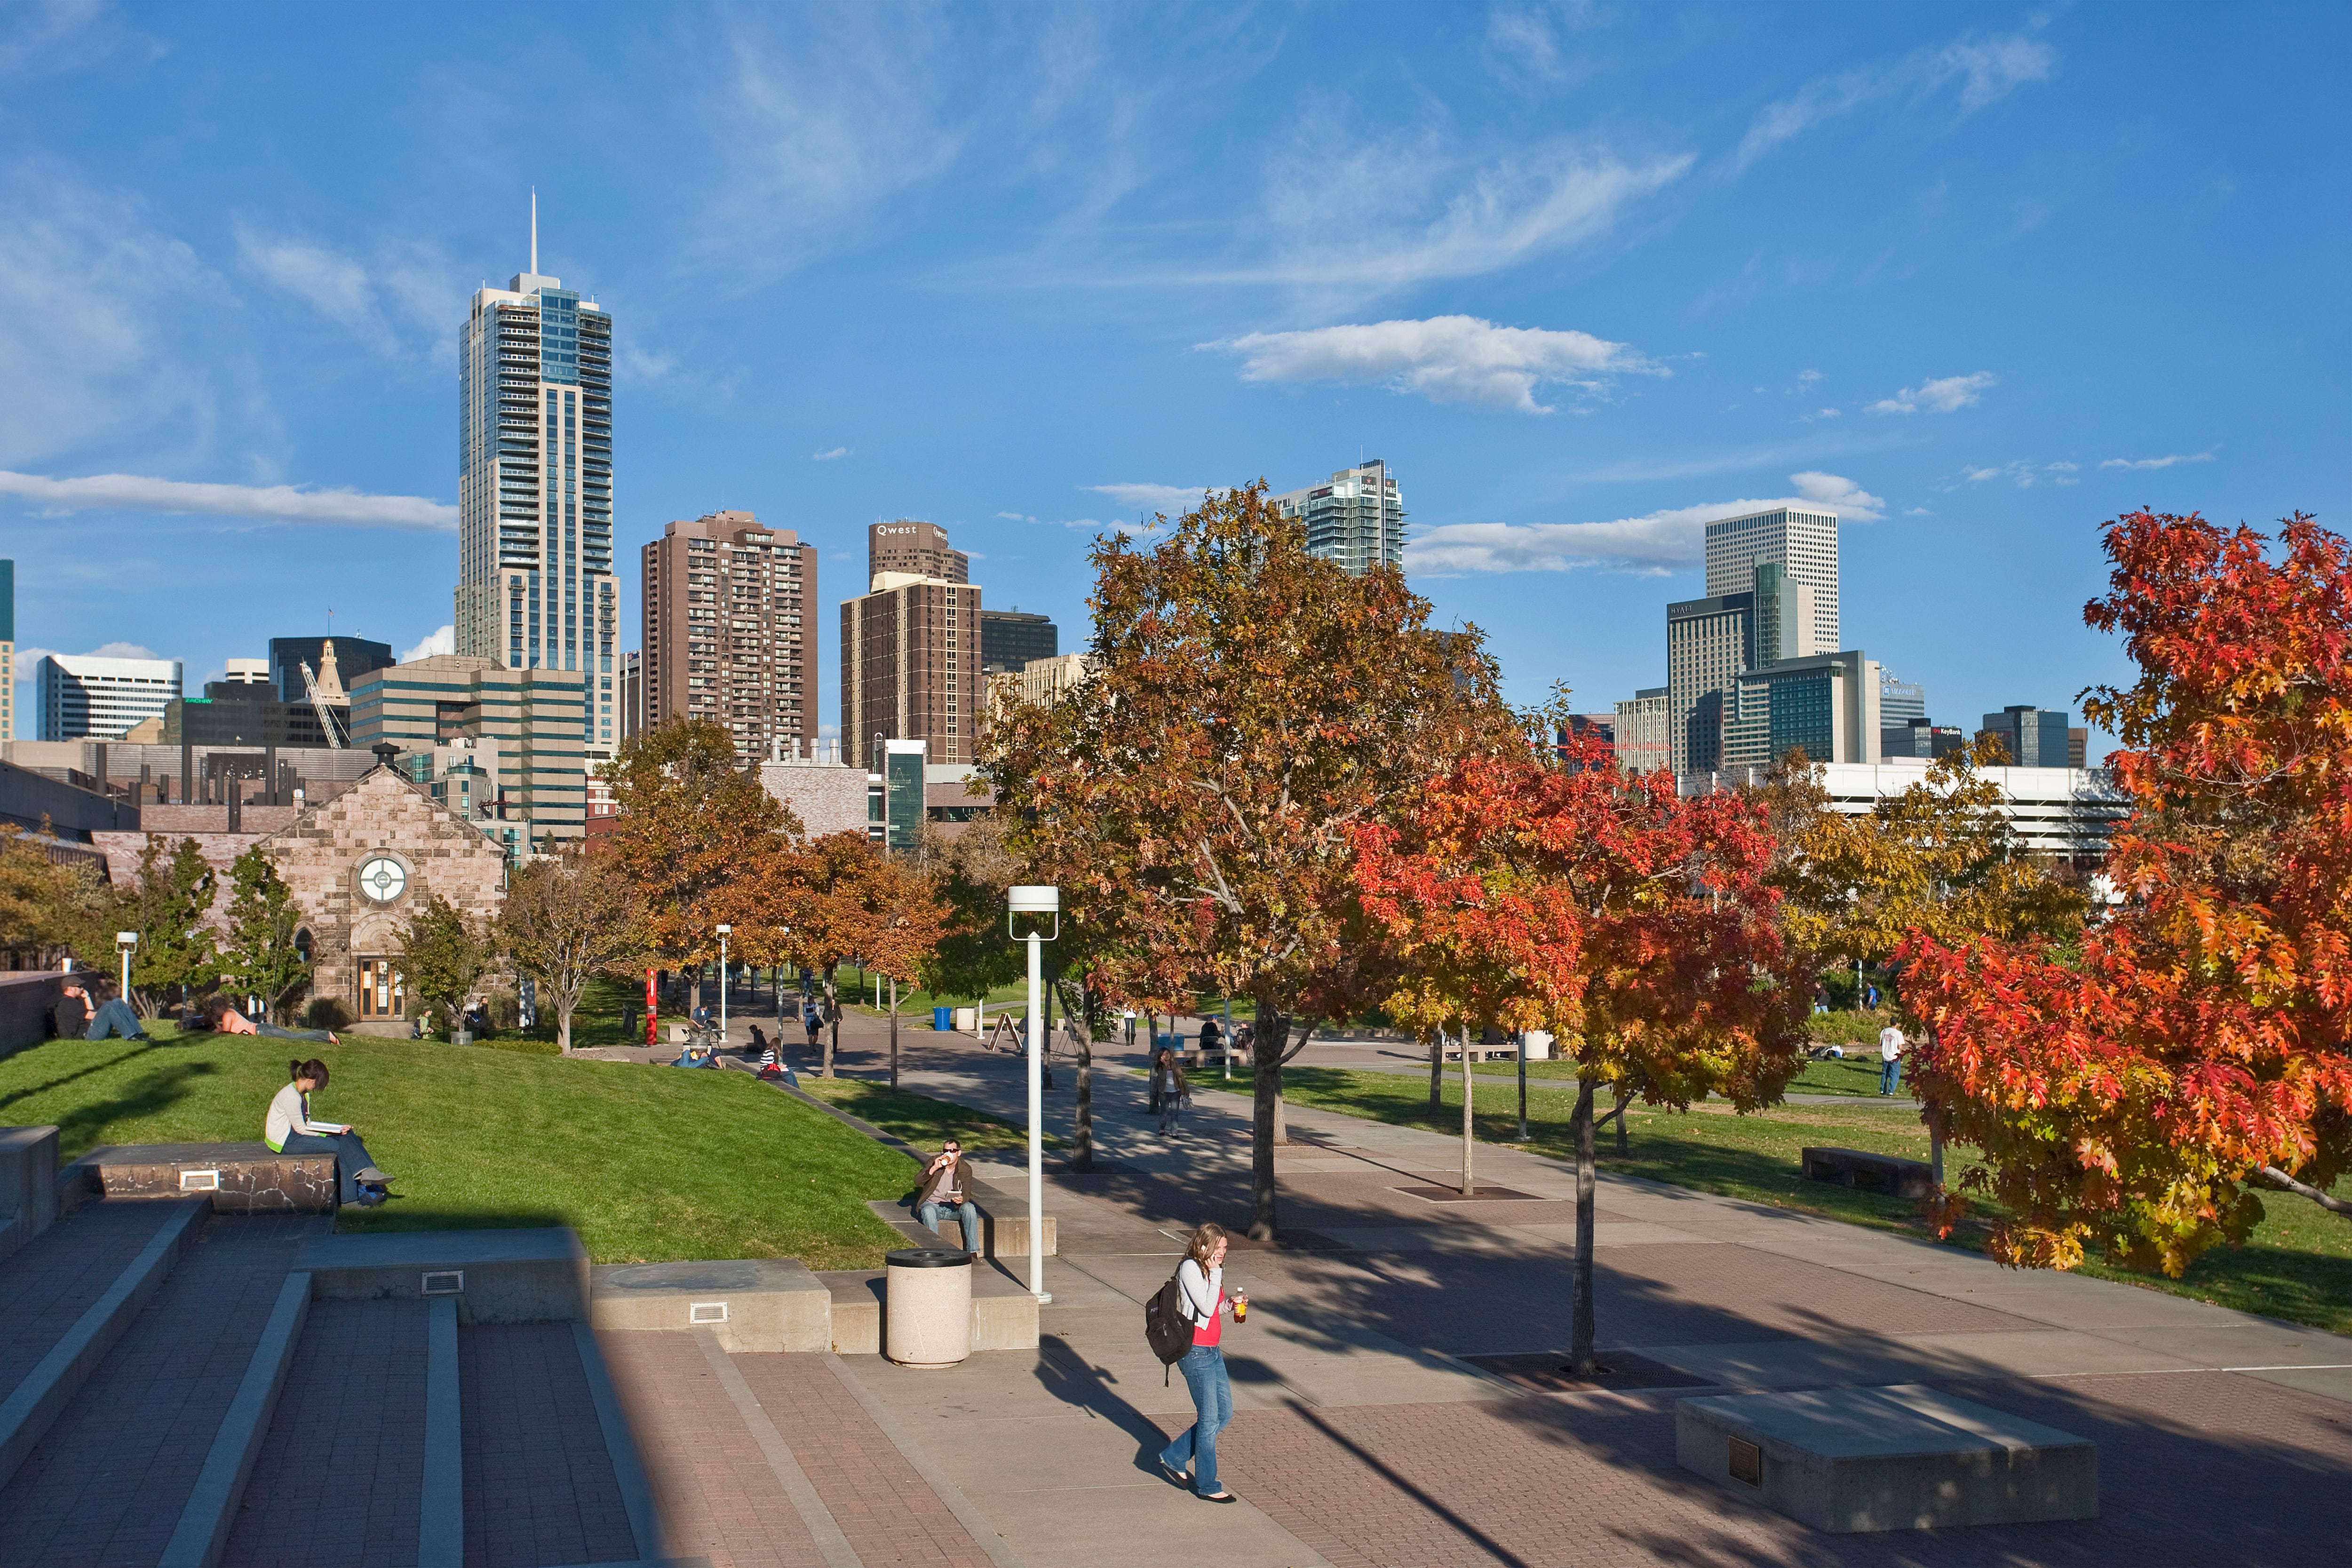 A college student wearing a backpack walks along a sidewalk with trees and Denver's skyline in the background.